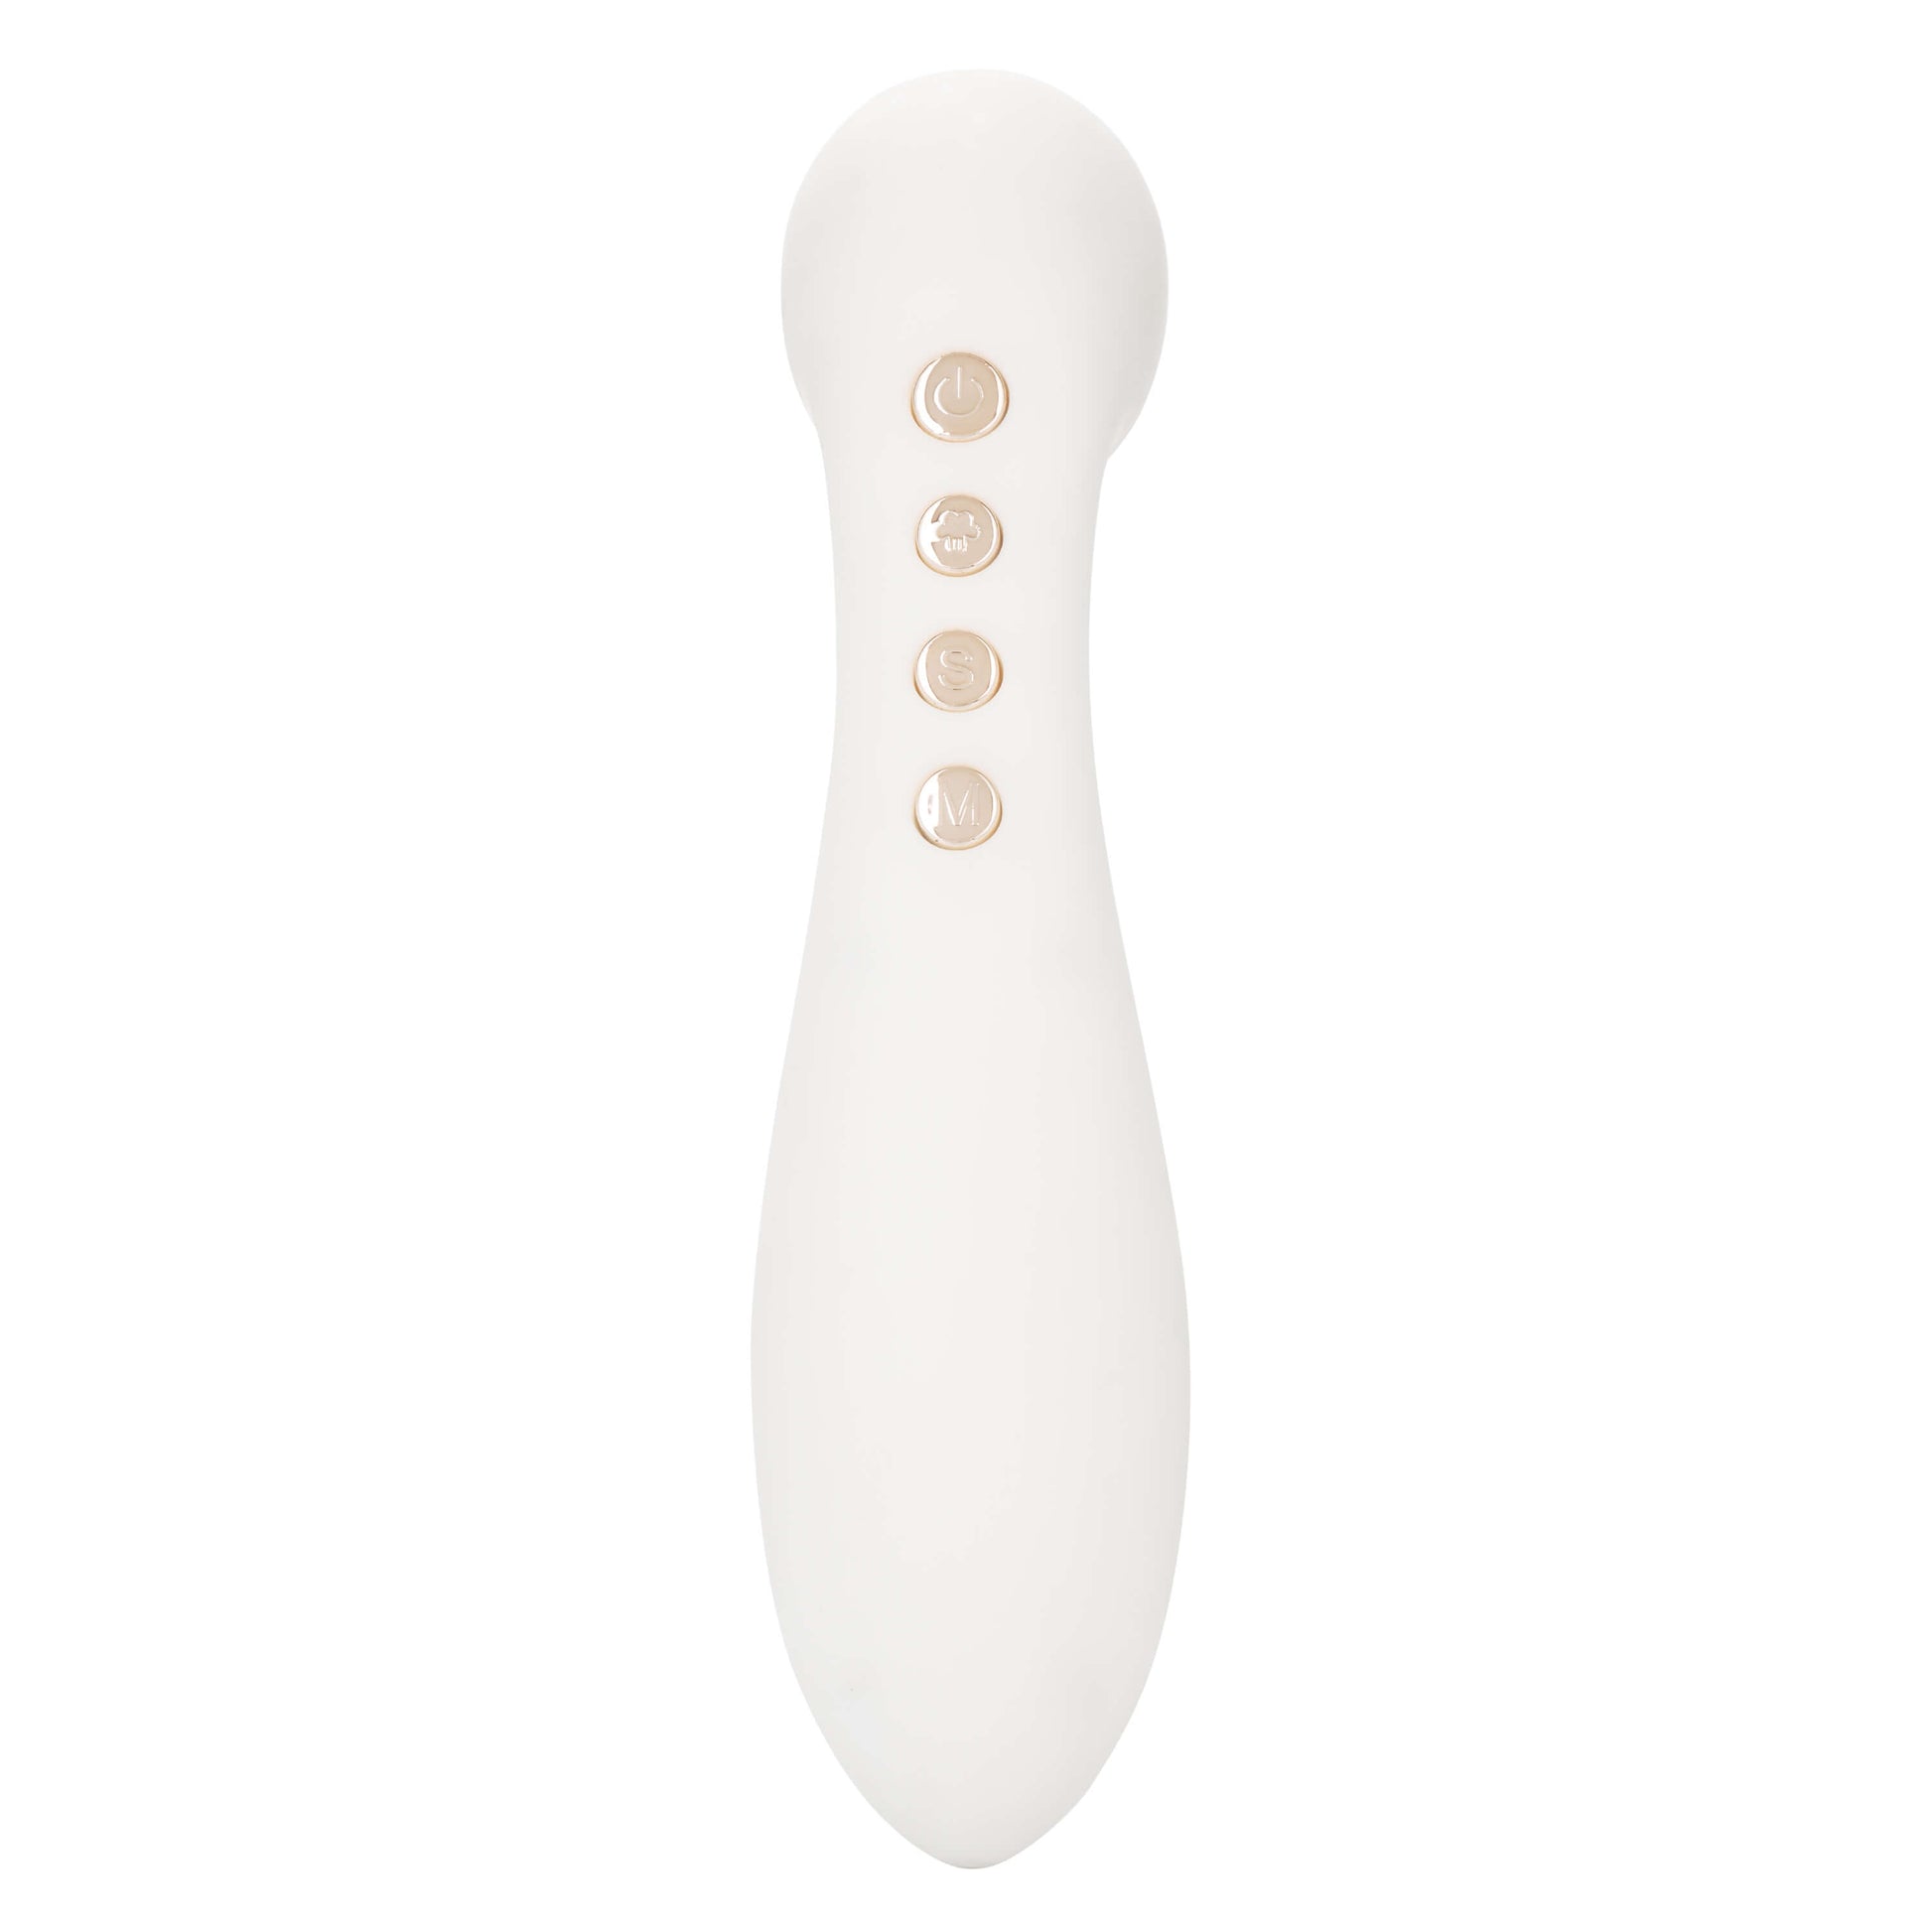 Empowered Smart Pleasure Idol - CalExotics - The Bigger O online sex toy shop USA, Canada & UK shipping available